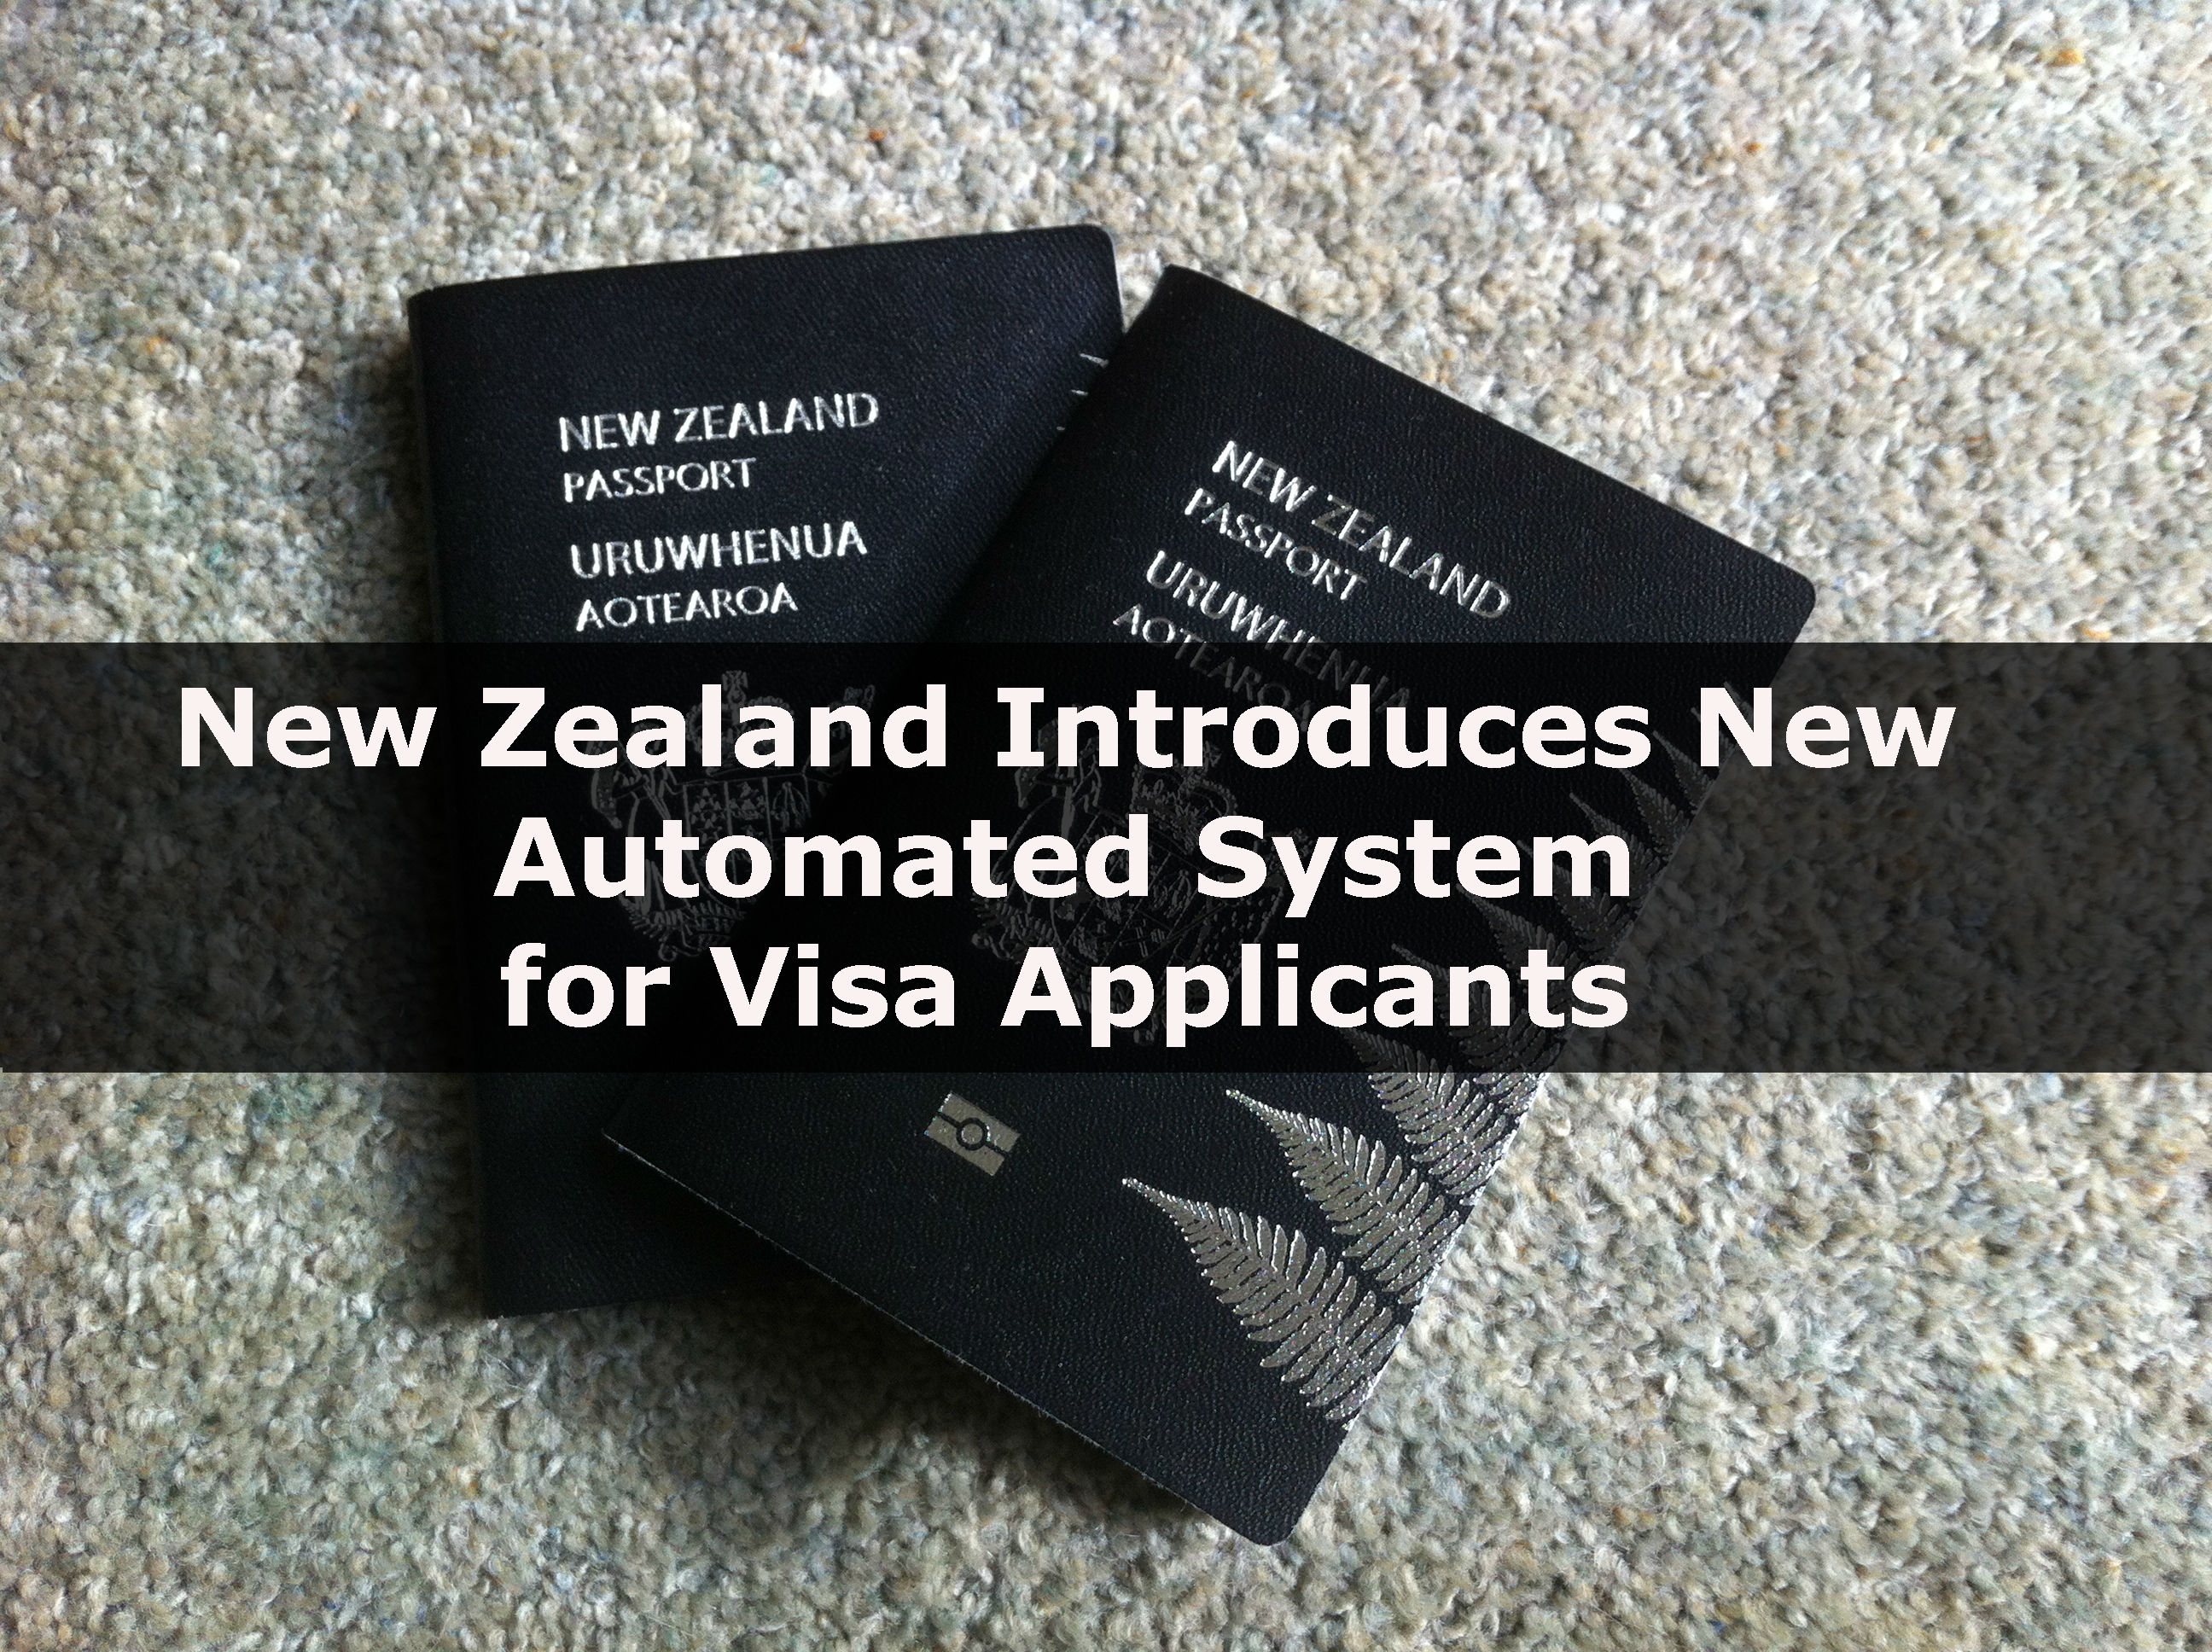 New Zealand Introduces New Automated System for Visa Applicants